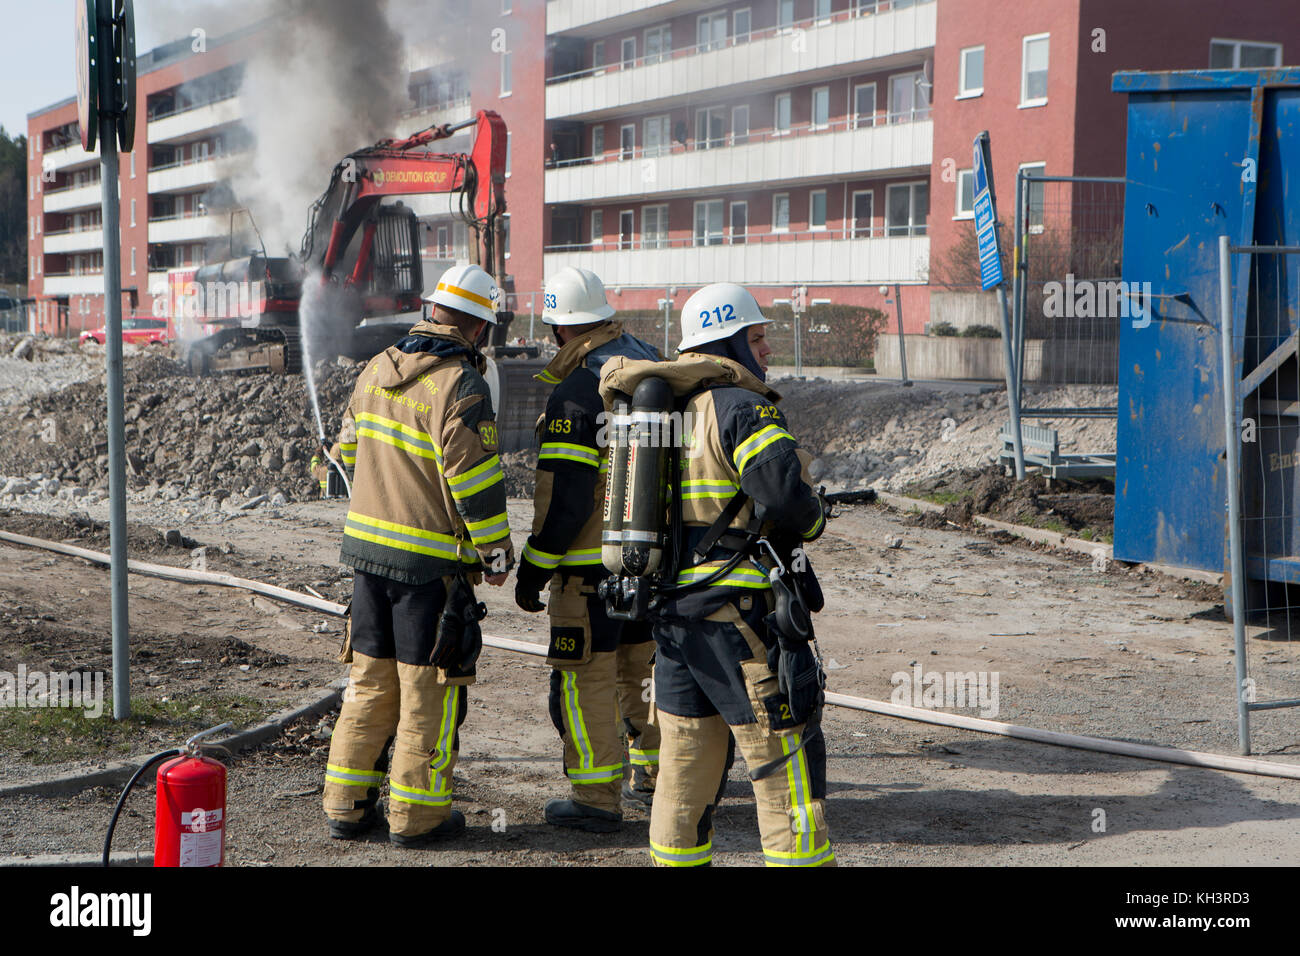 Rescue personnel at a fire, Rinkeby, Sweden. Stock Photo